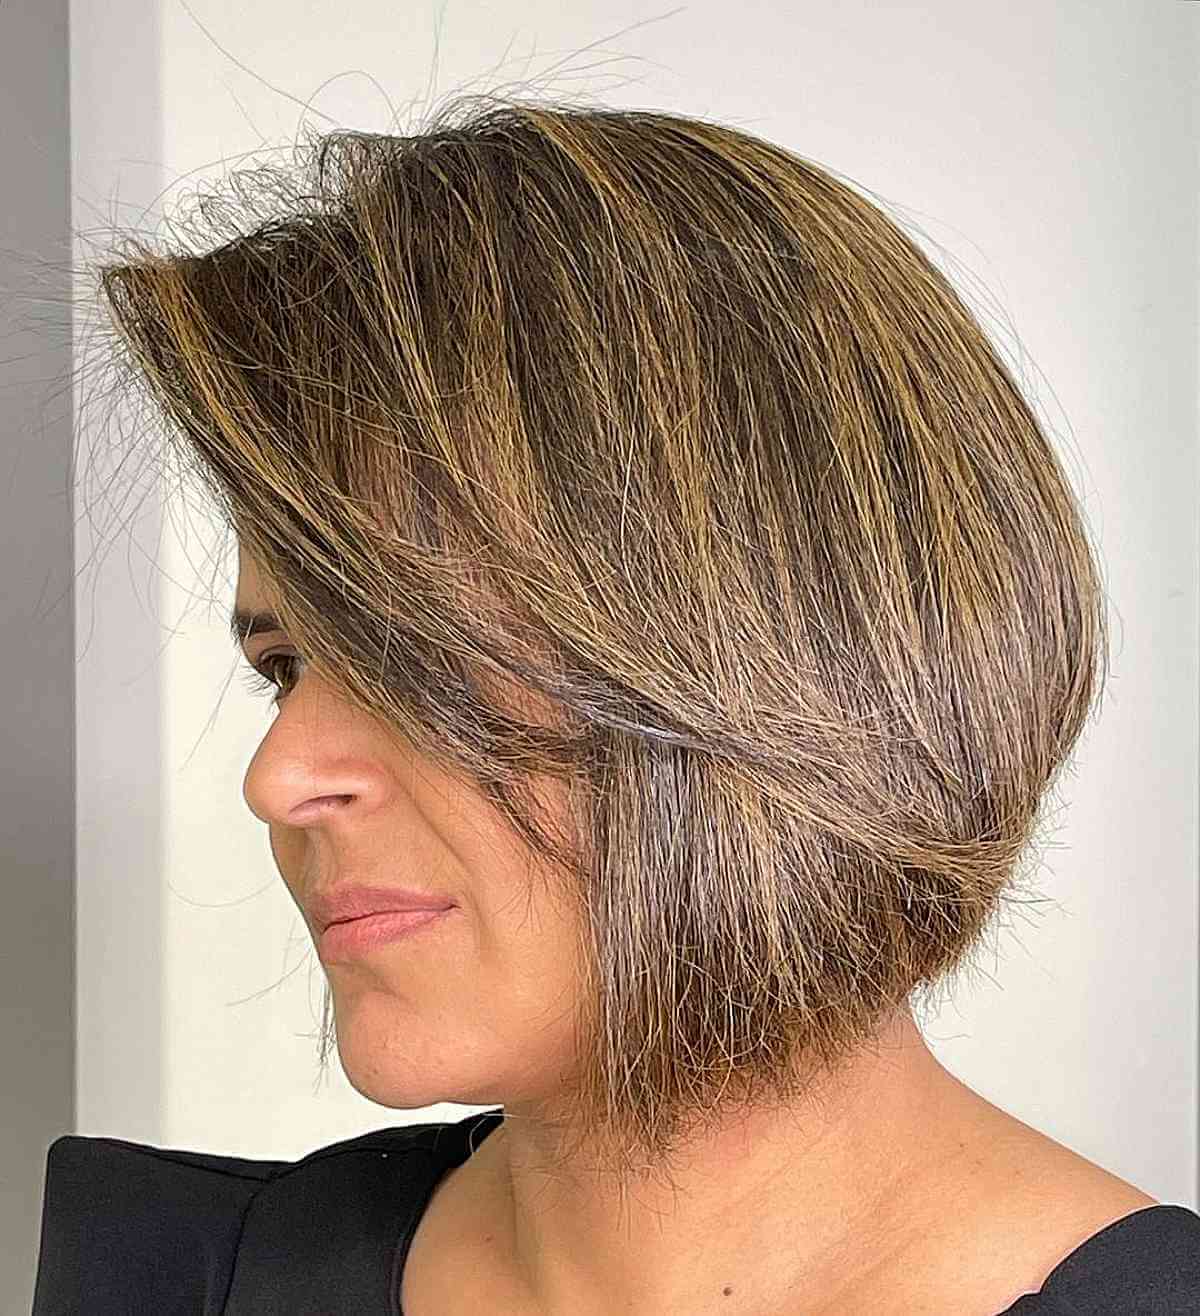 Medium Bob with Long Bangs for Women 40 and Up